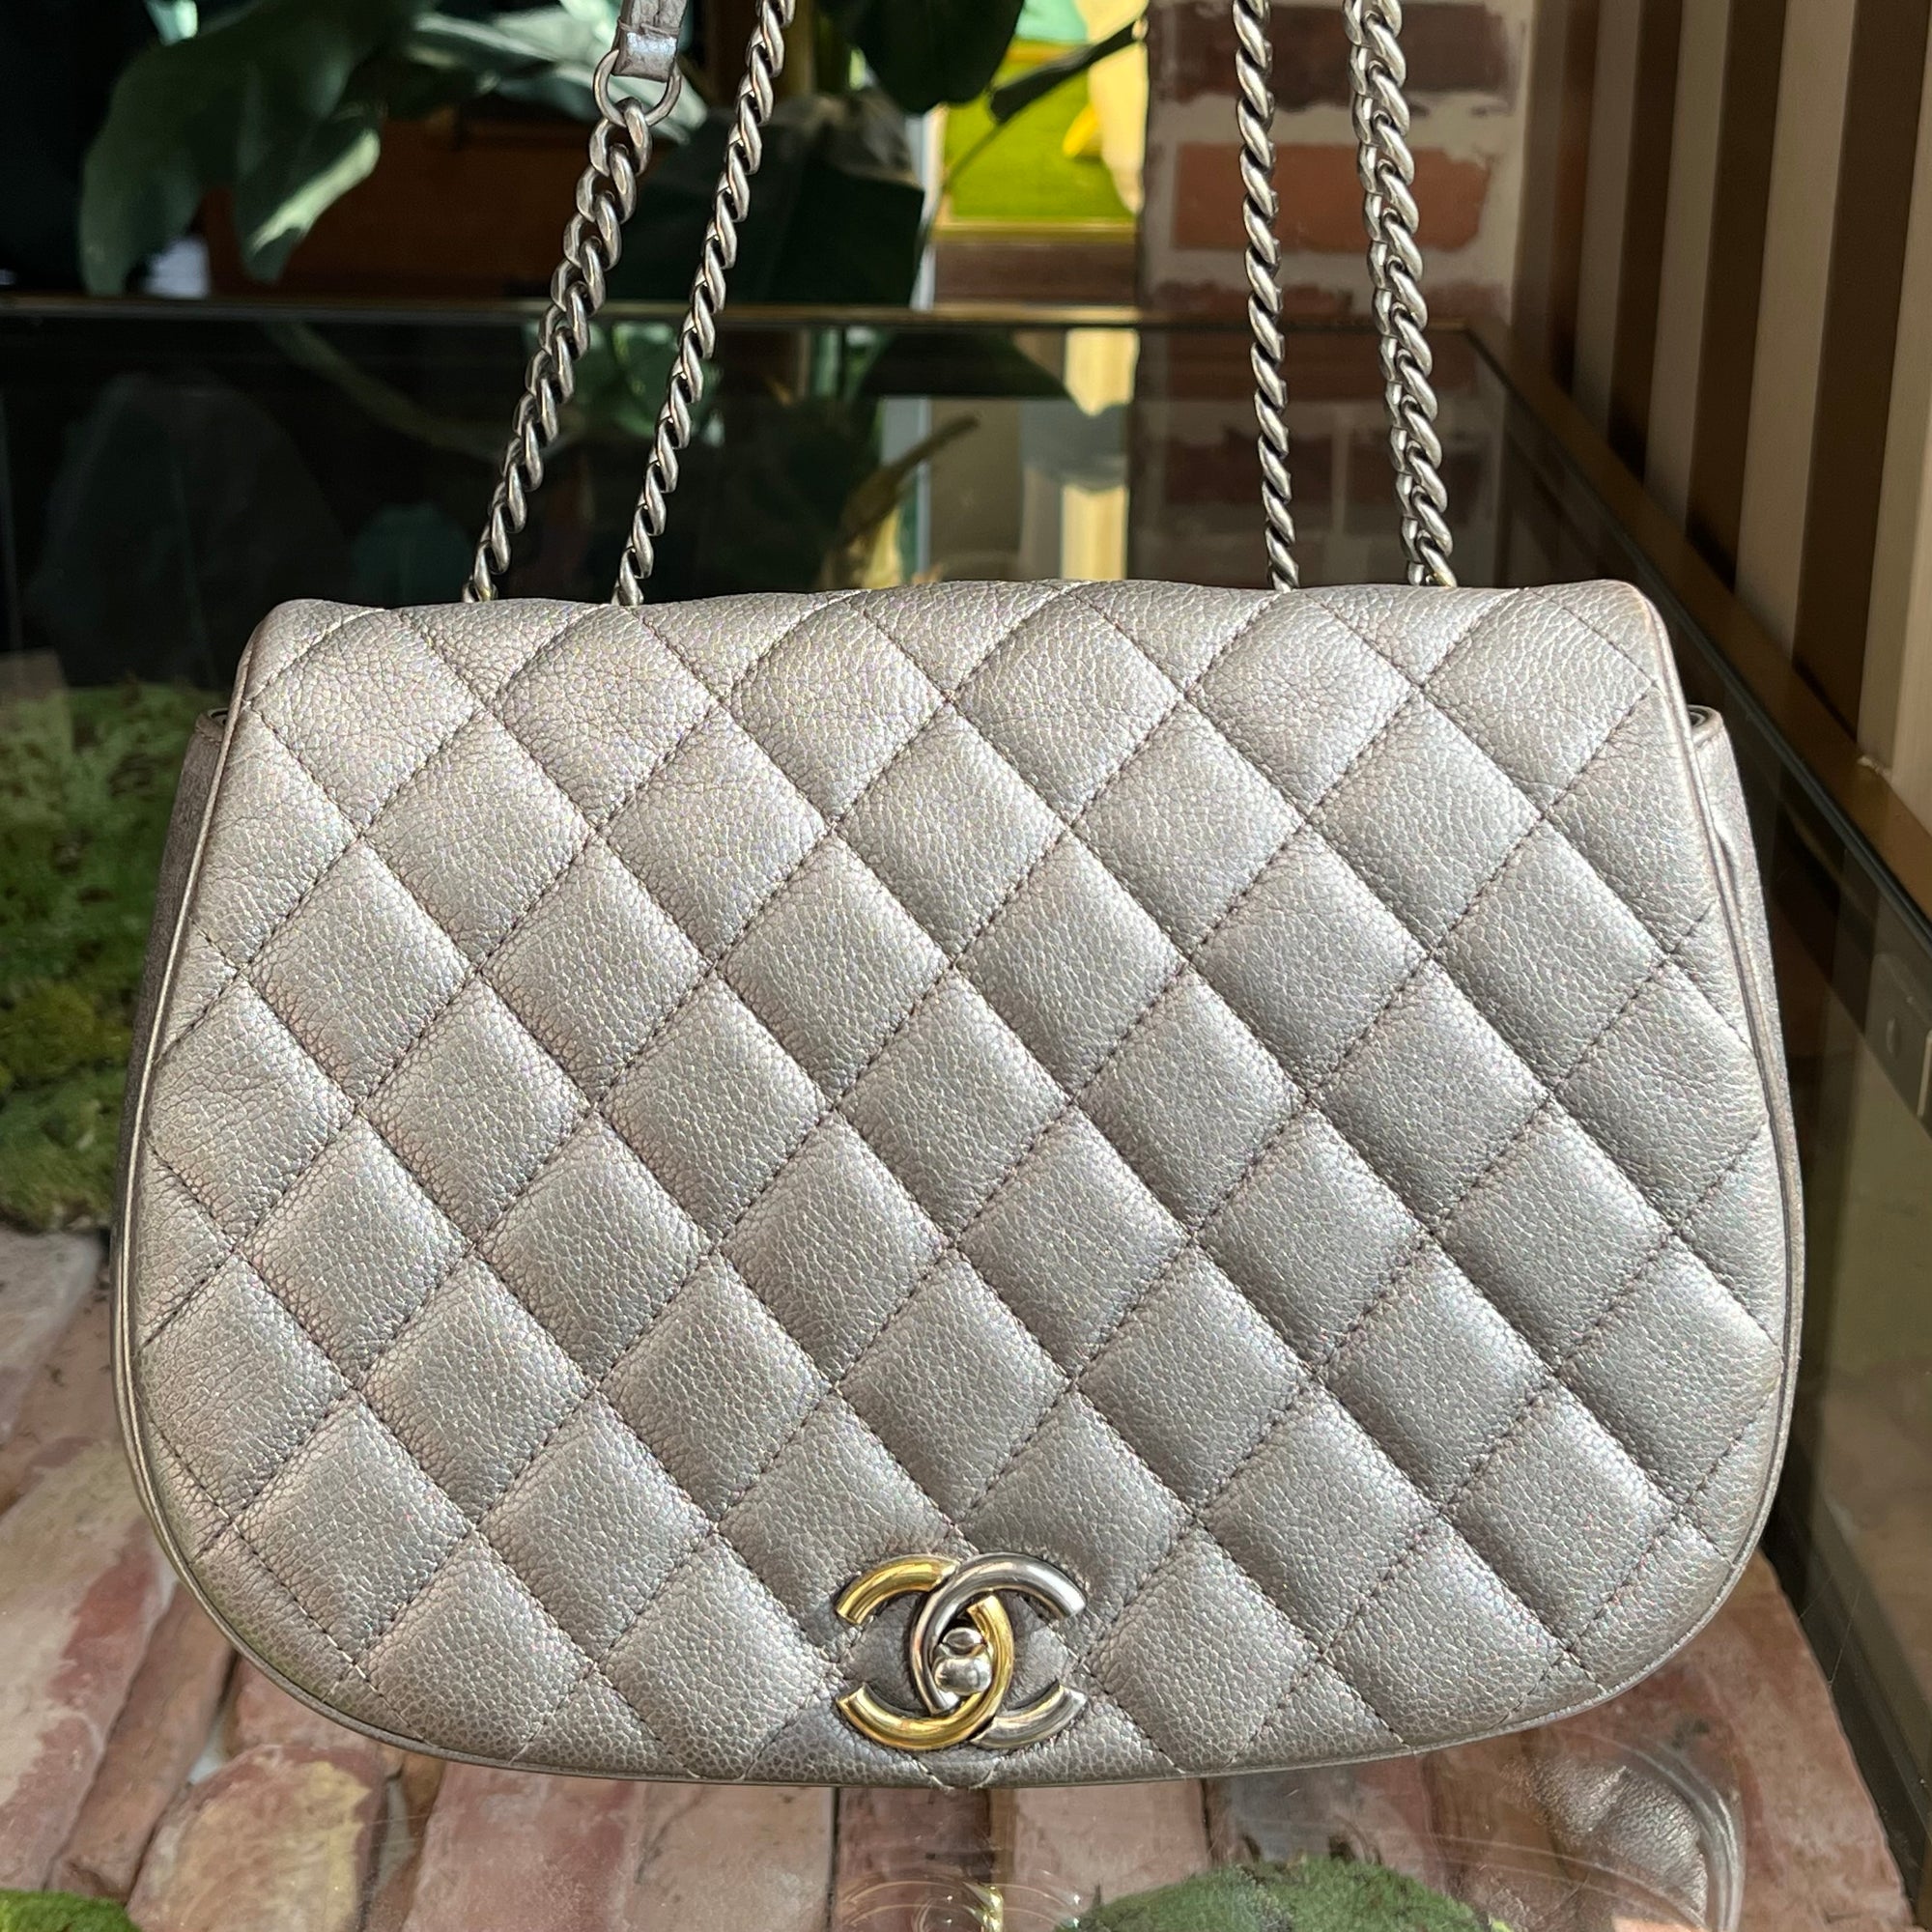 CHANEL Metallic Silver Calfskin Quilted Casual Pocket Messenger Flap